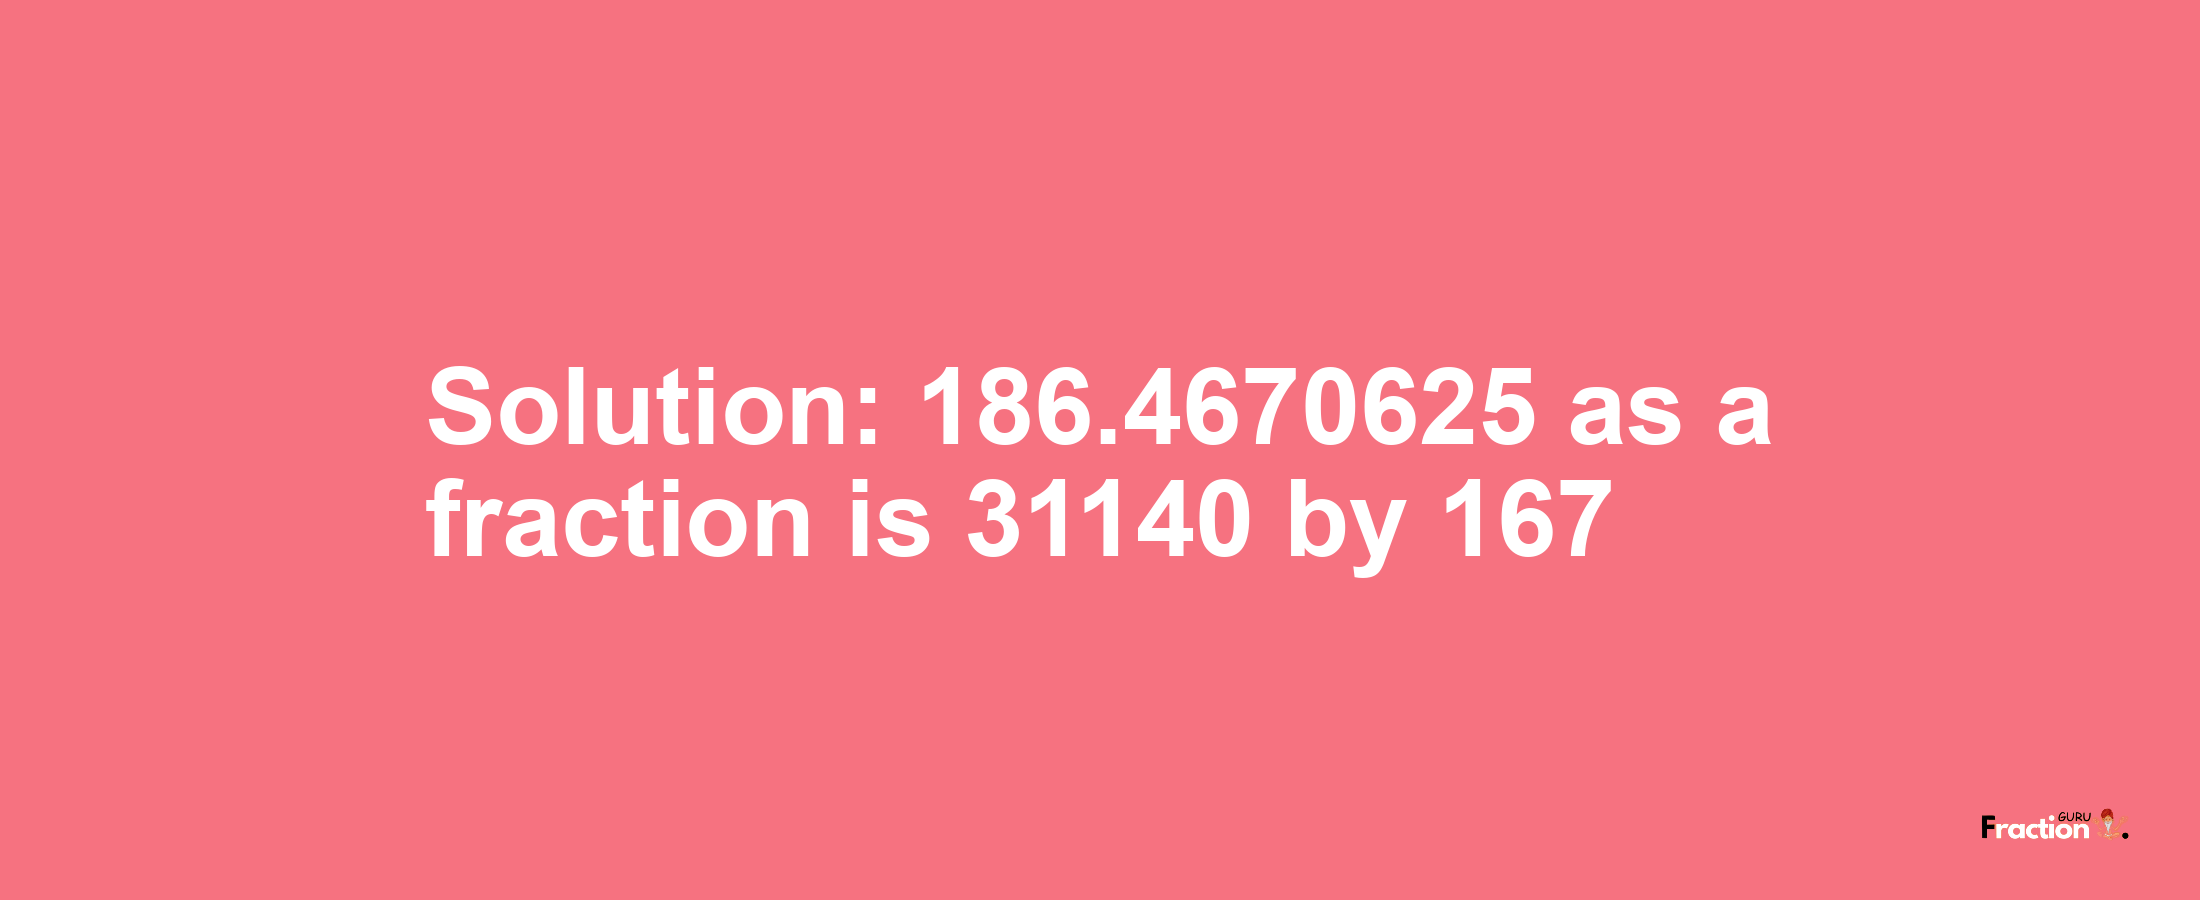 Solution:186.4670625 as a fraction is 31140/167